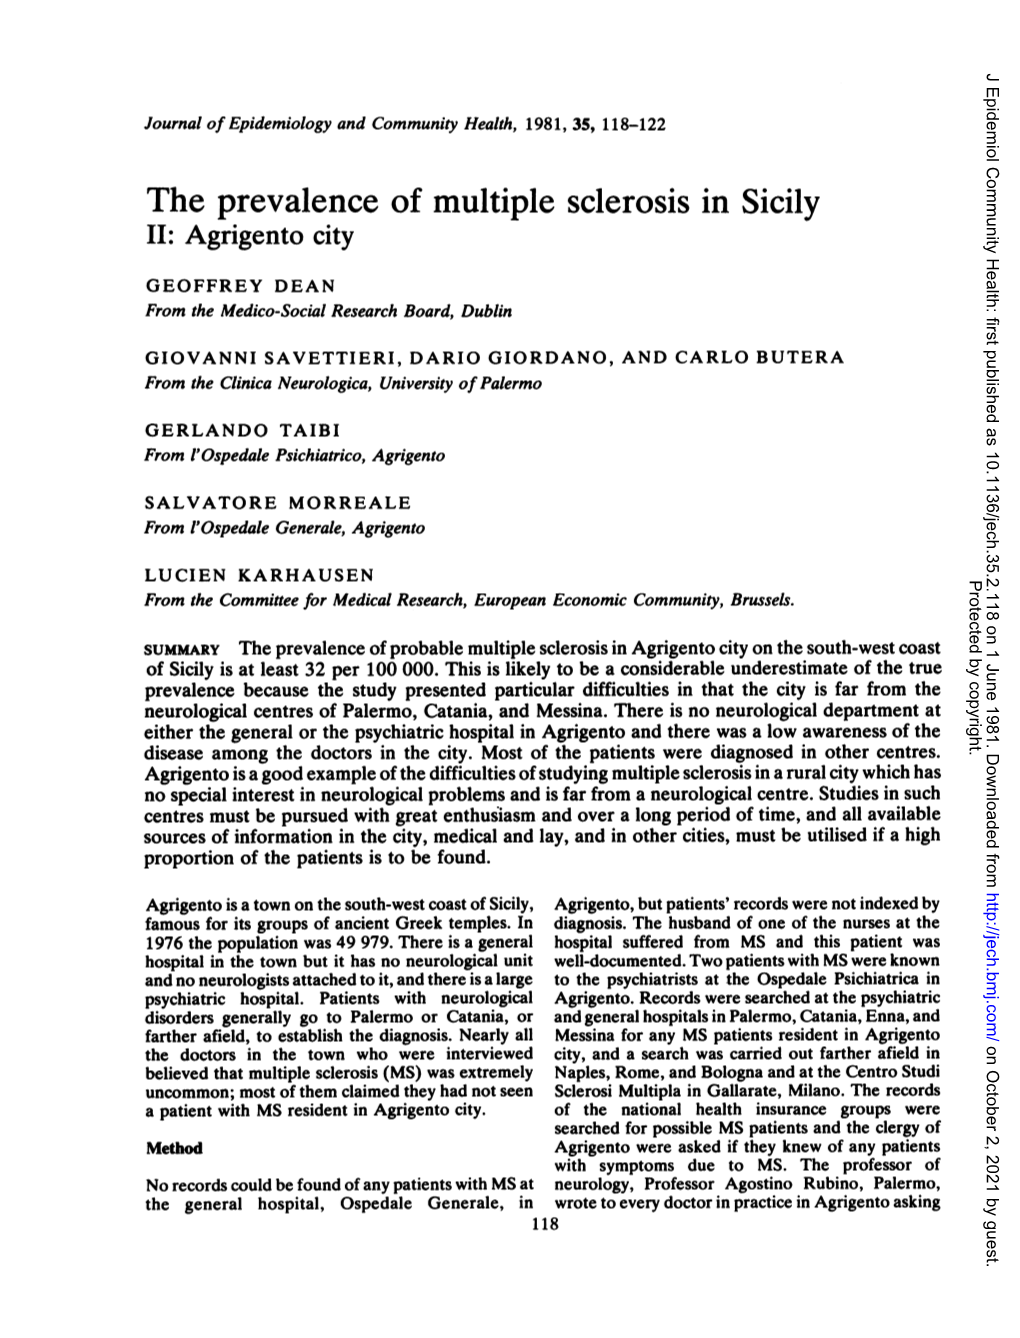 The Prevalence of Multiple Sclerosis in Sicily II: Agrigento City